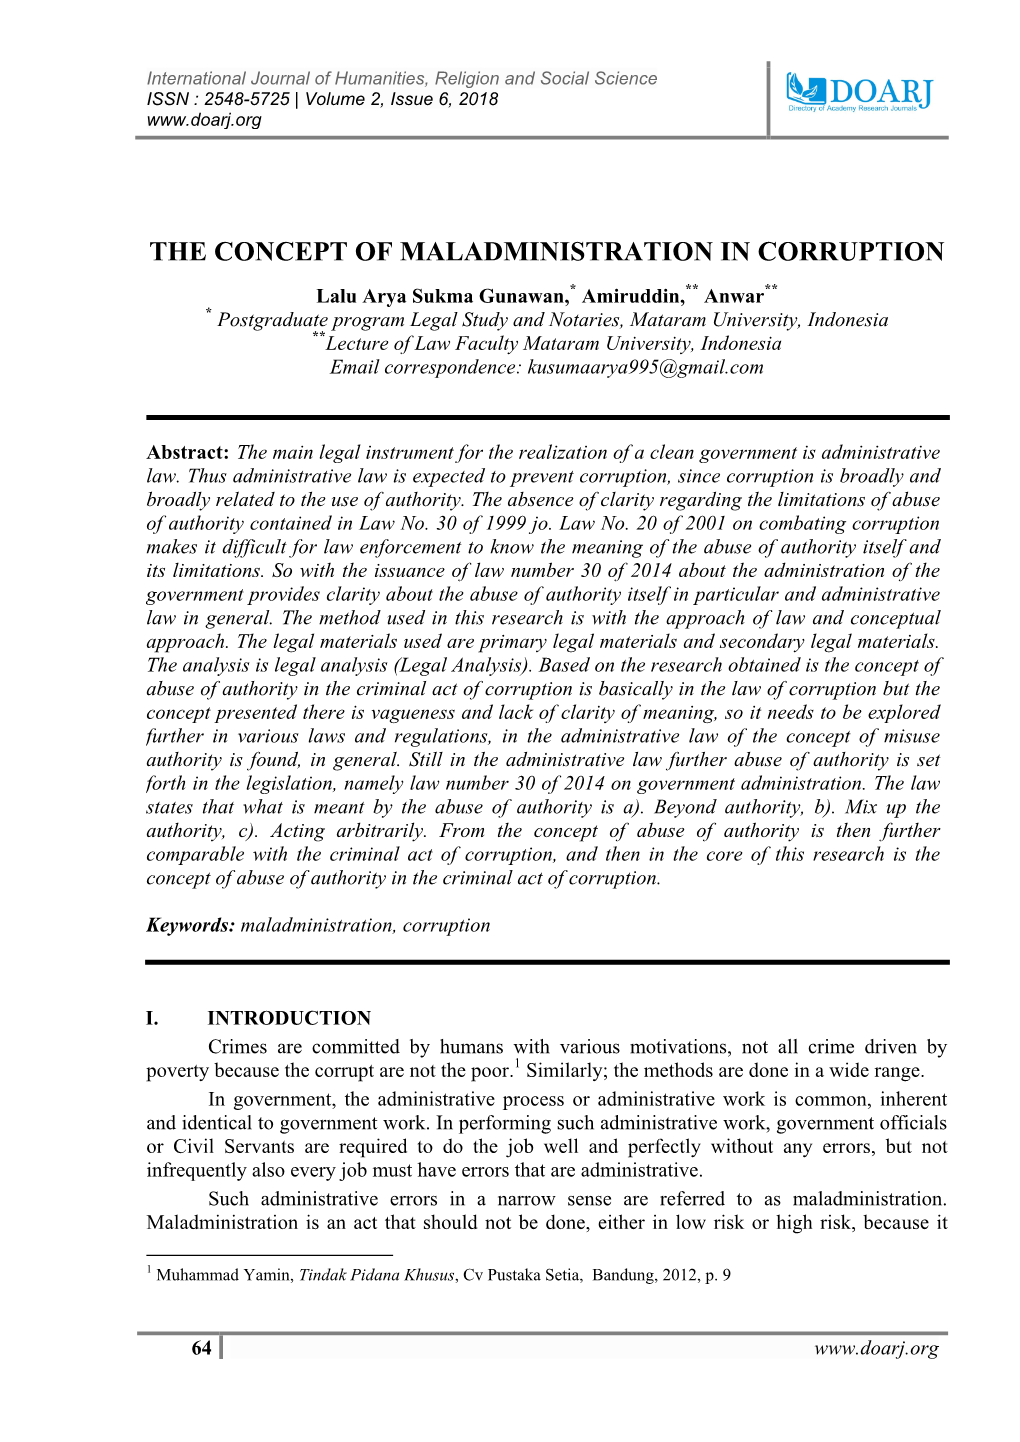 The Concept of Maladministration In